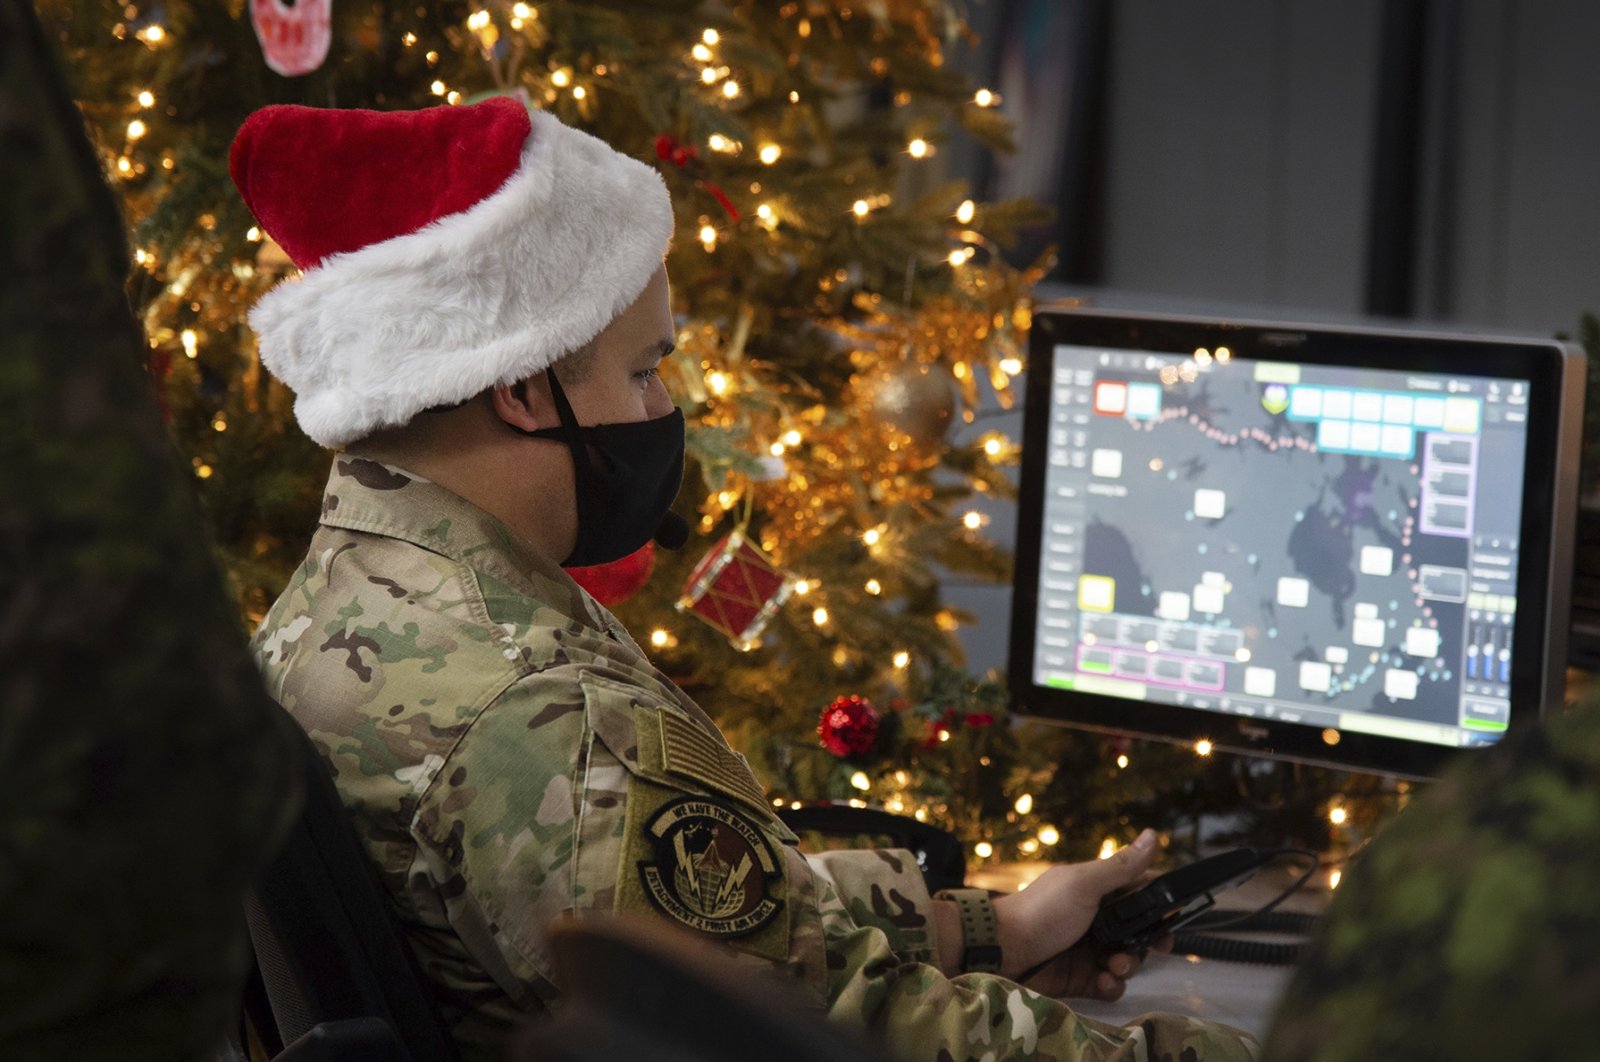 In this photo provided by the North American Aerospace Defense Command, a 22 Wing member is seen showing how they track Santa on his sleigh on Christmas Eve during a media preview at the Canadian Forces Base in North Bay, Canada, Dec. 9, 2021. (NORAD via AP)